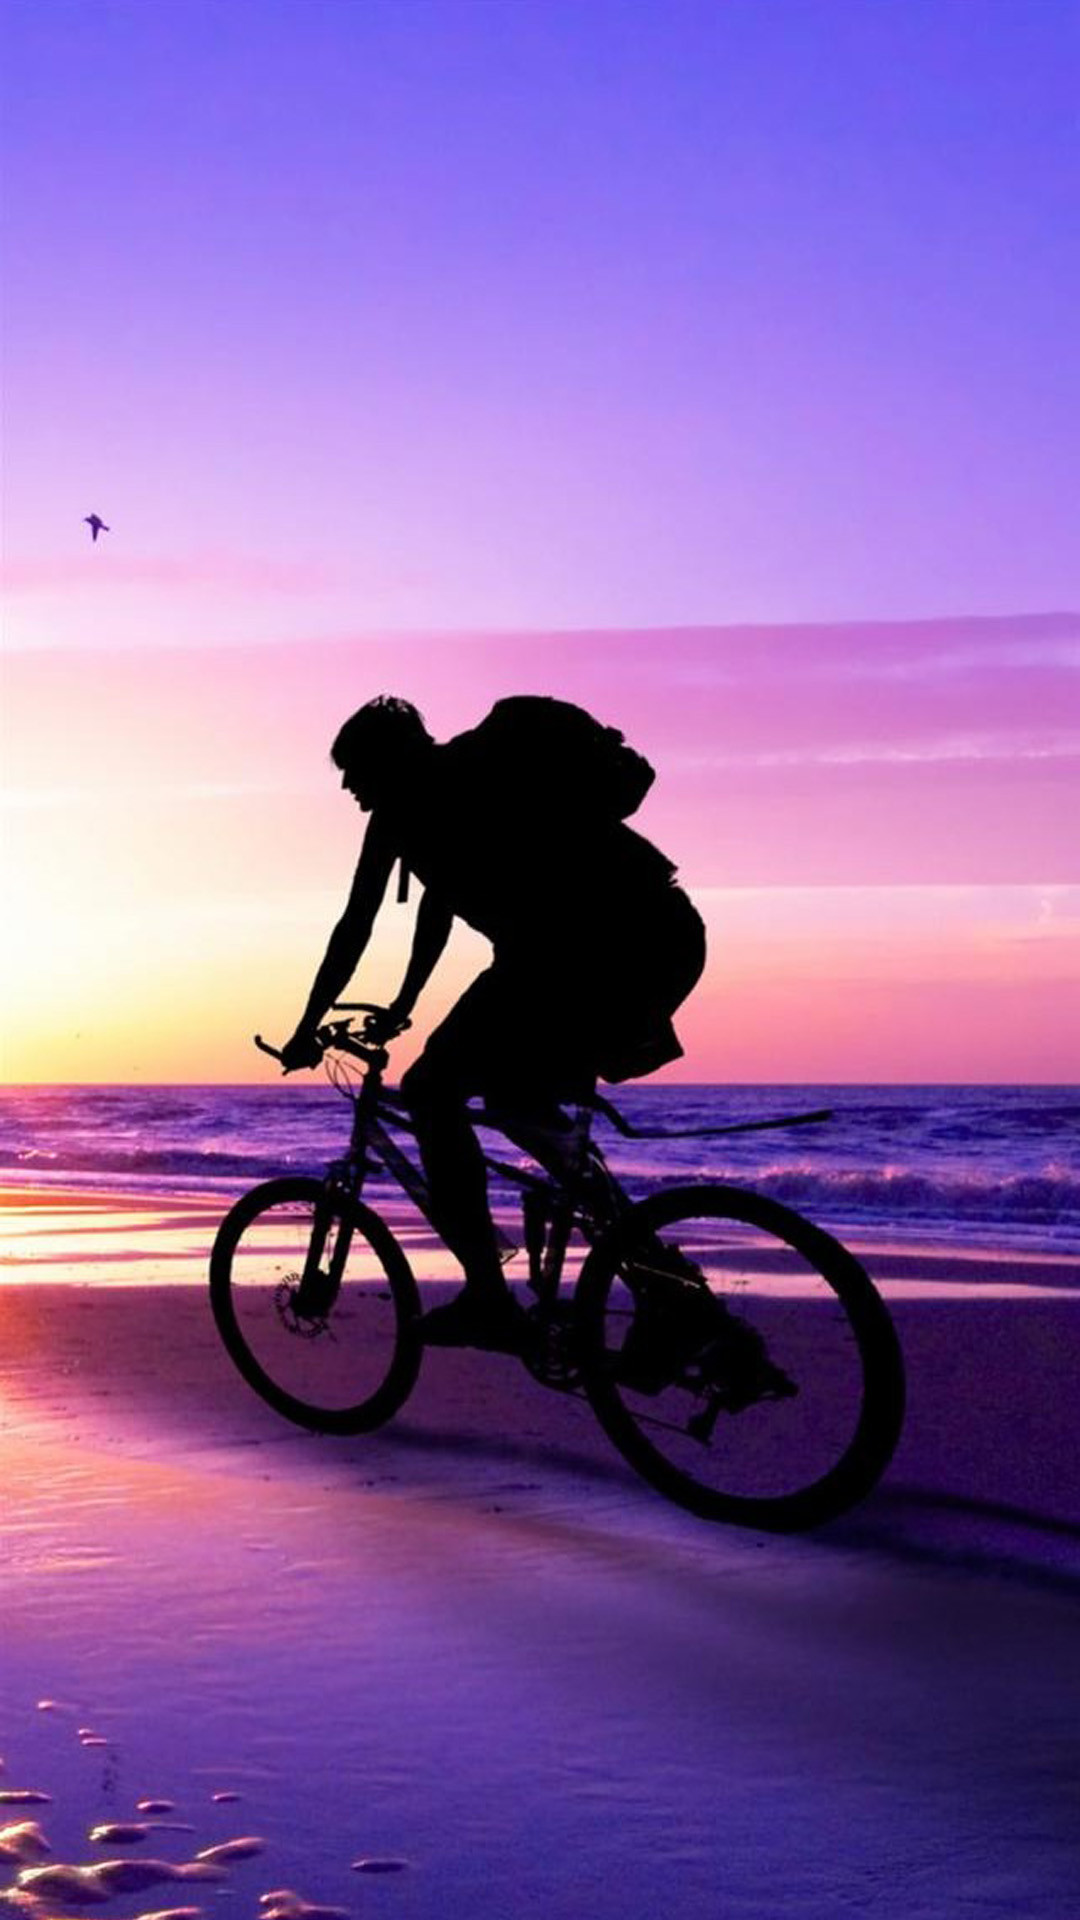 Beach Sunset Bicycle Ride iPhone 6 Plus hd Wallpaper